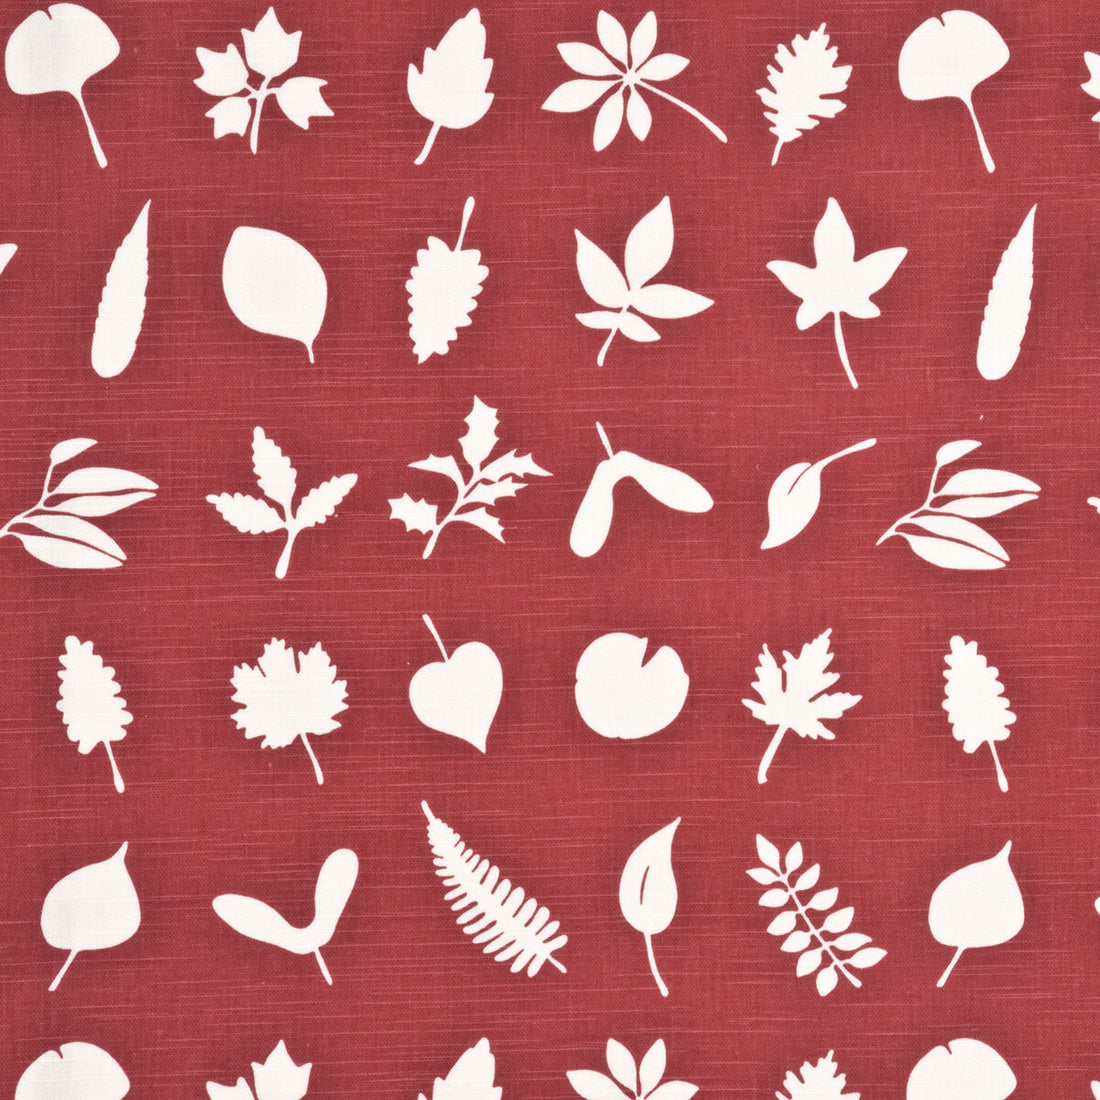 Tumbling Leaves fabric in red color - pattern PP50342.2.0 - by Baker Lifestyle in the Opera Garden collection